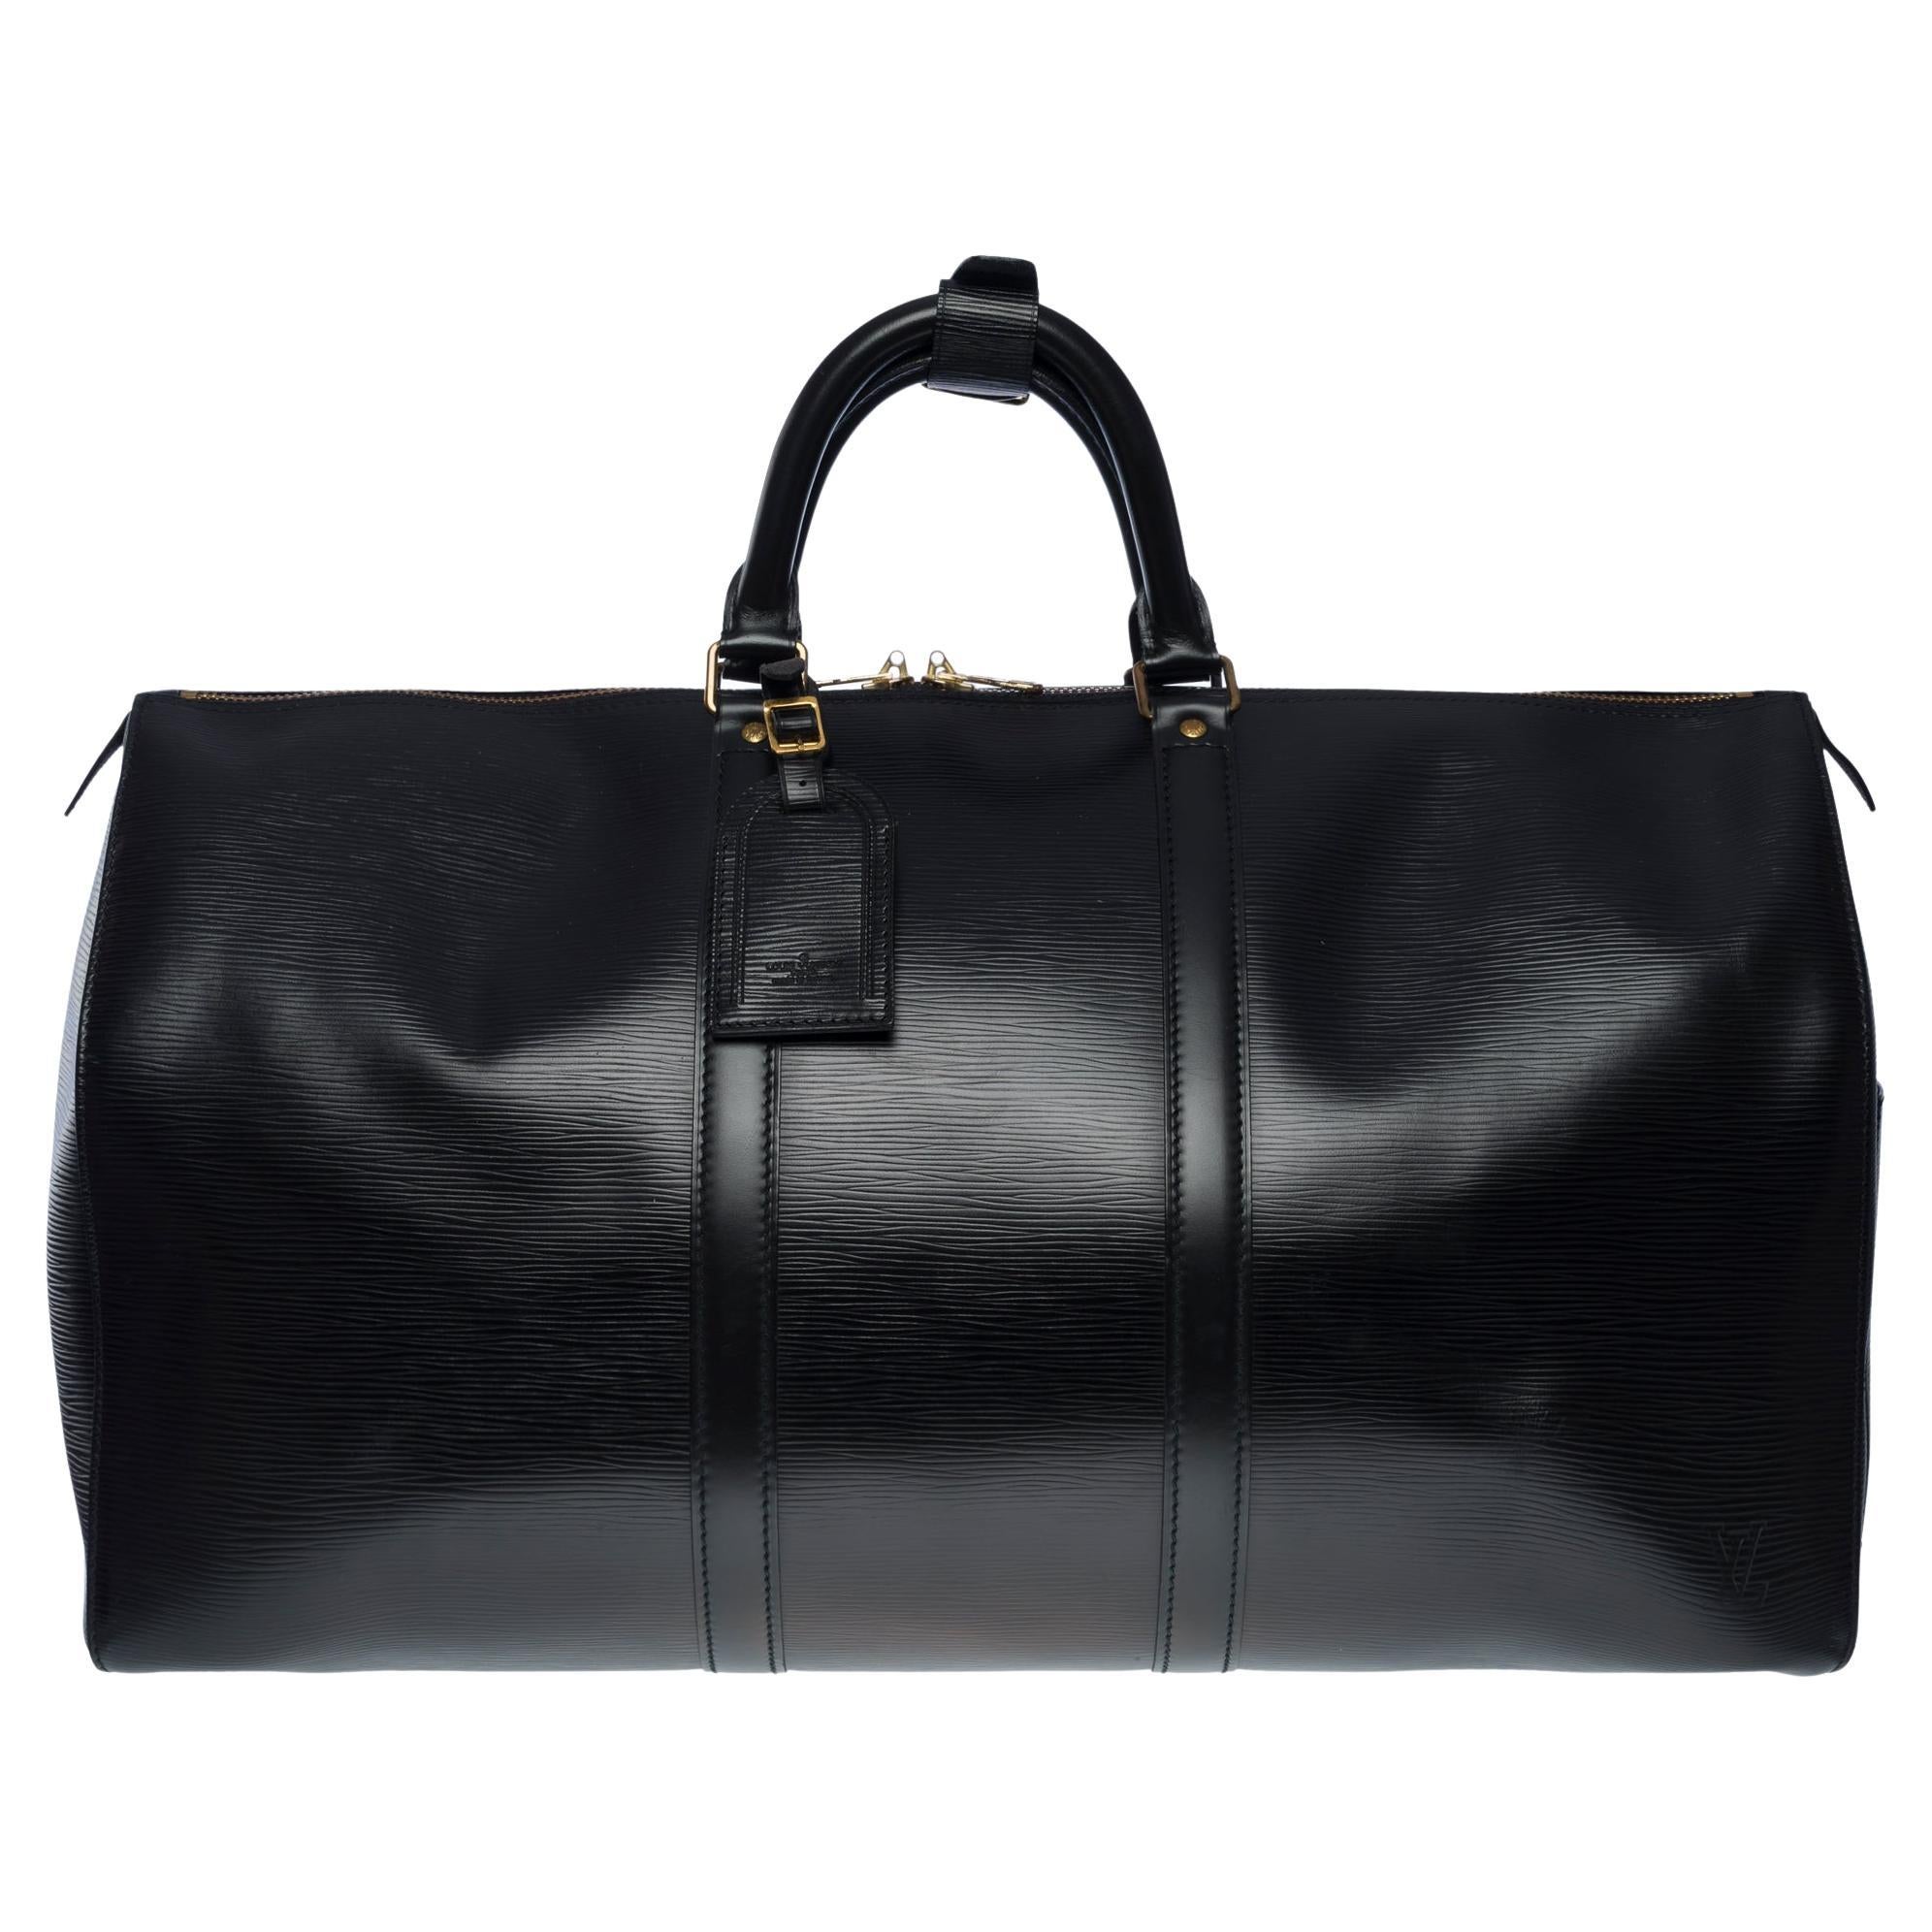 Very Chic Louis Vuitton Keepall 55 Travel bag in Black epi leather, GHW